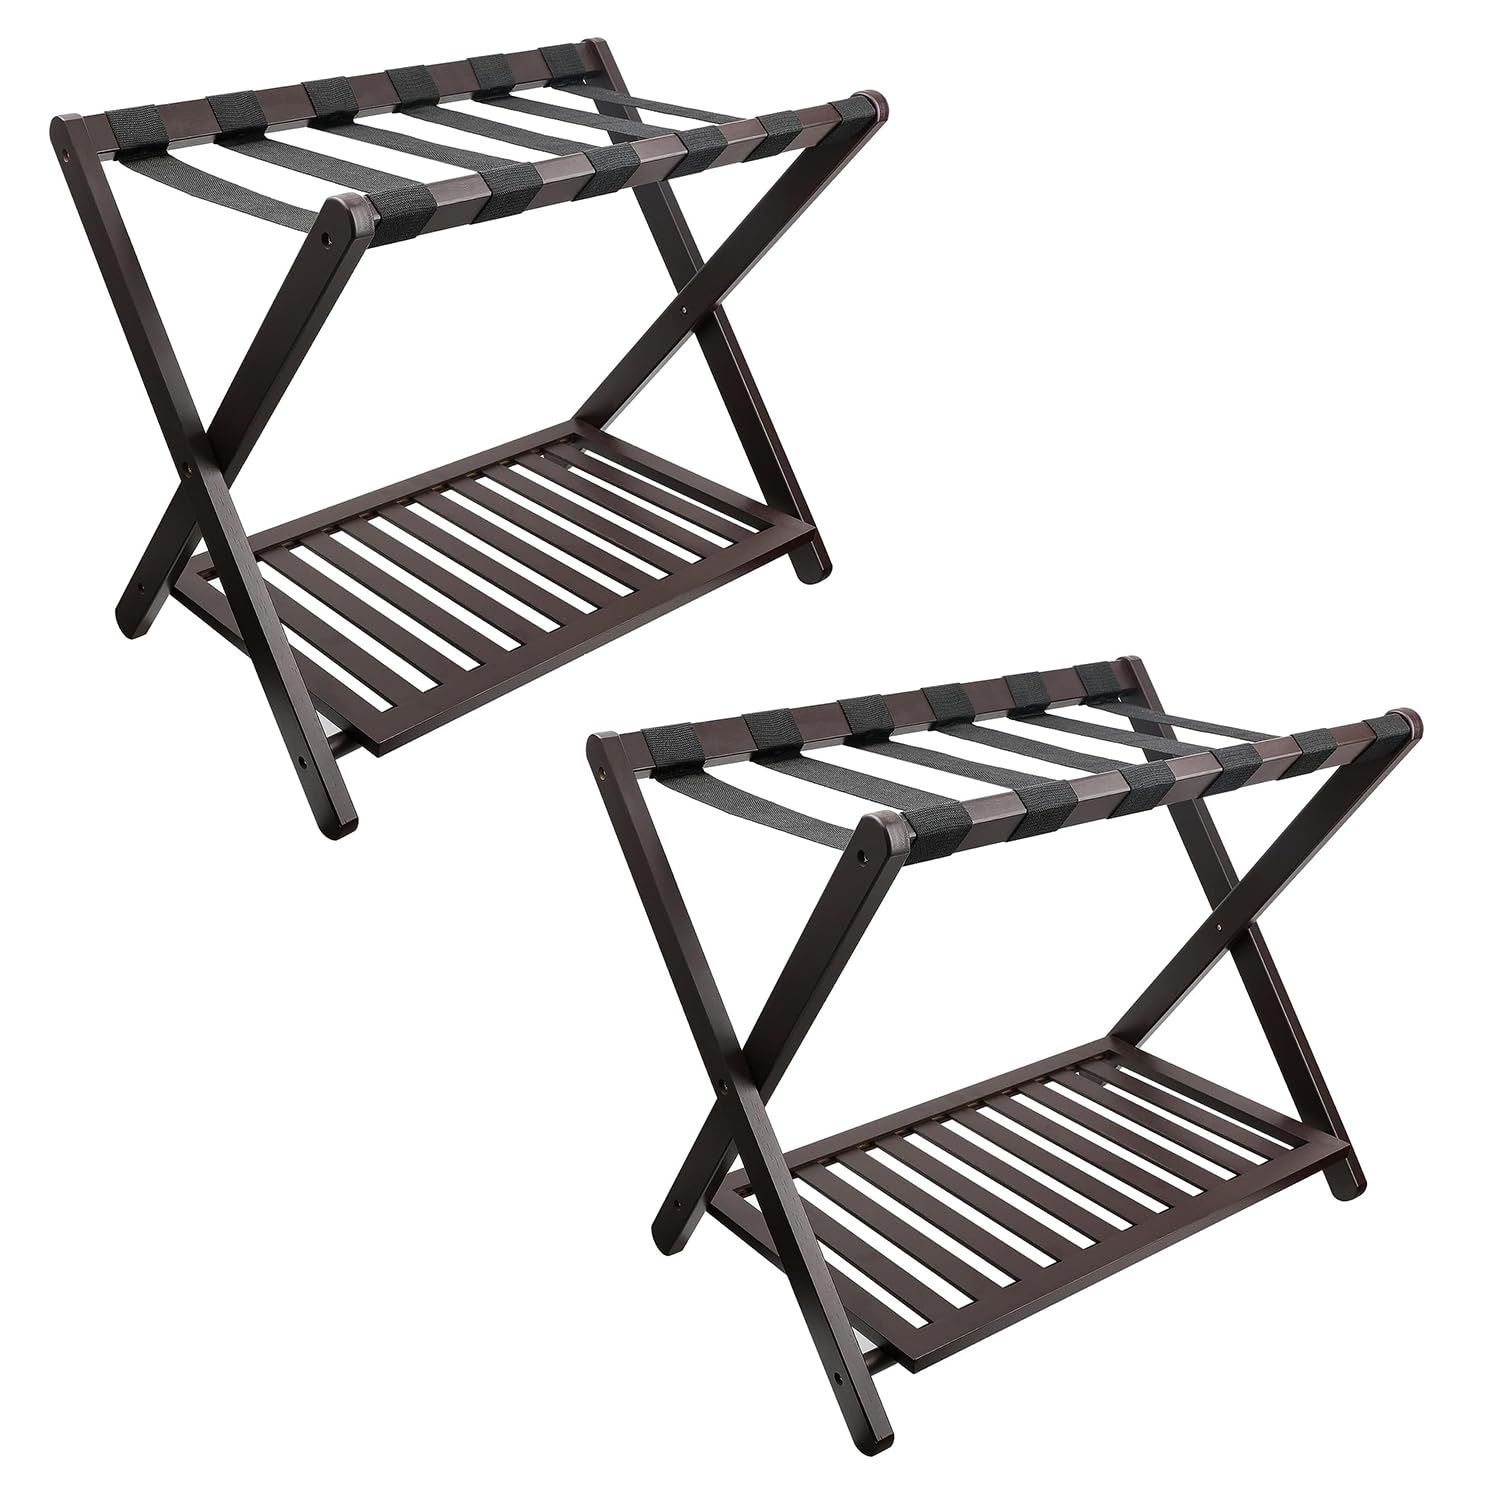 2 Pack Bamboo Luggage Rack For Guest Room, Heavy Duty Folding Suitcase Stand With Storage Shelf For Home Bedroom Hotel - Brown 2Pack Brown